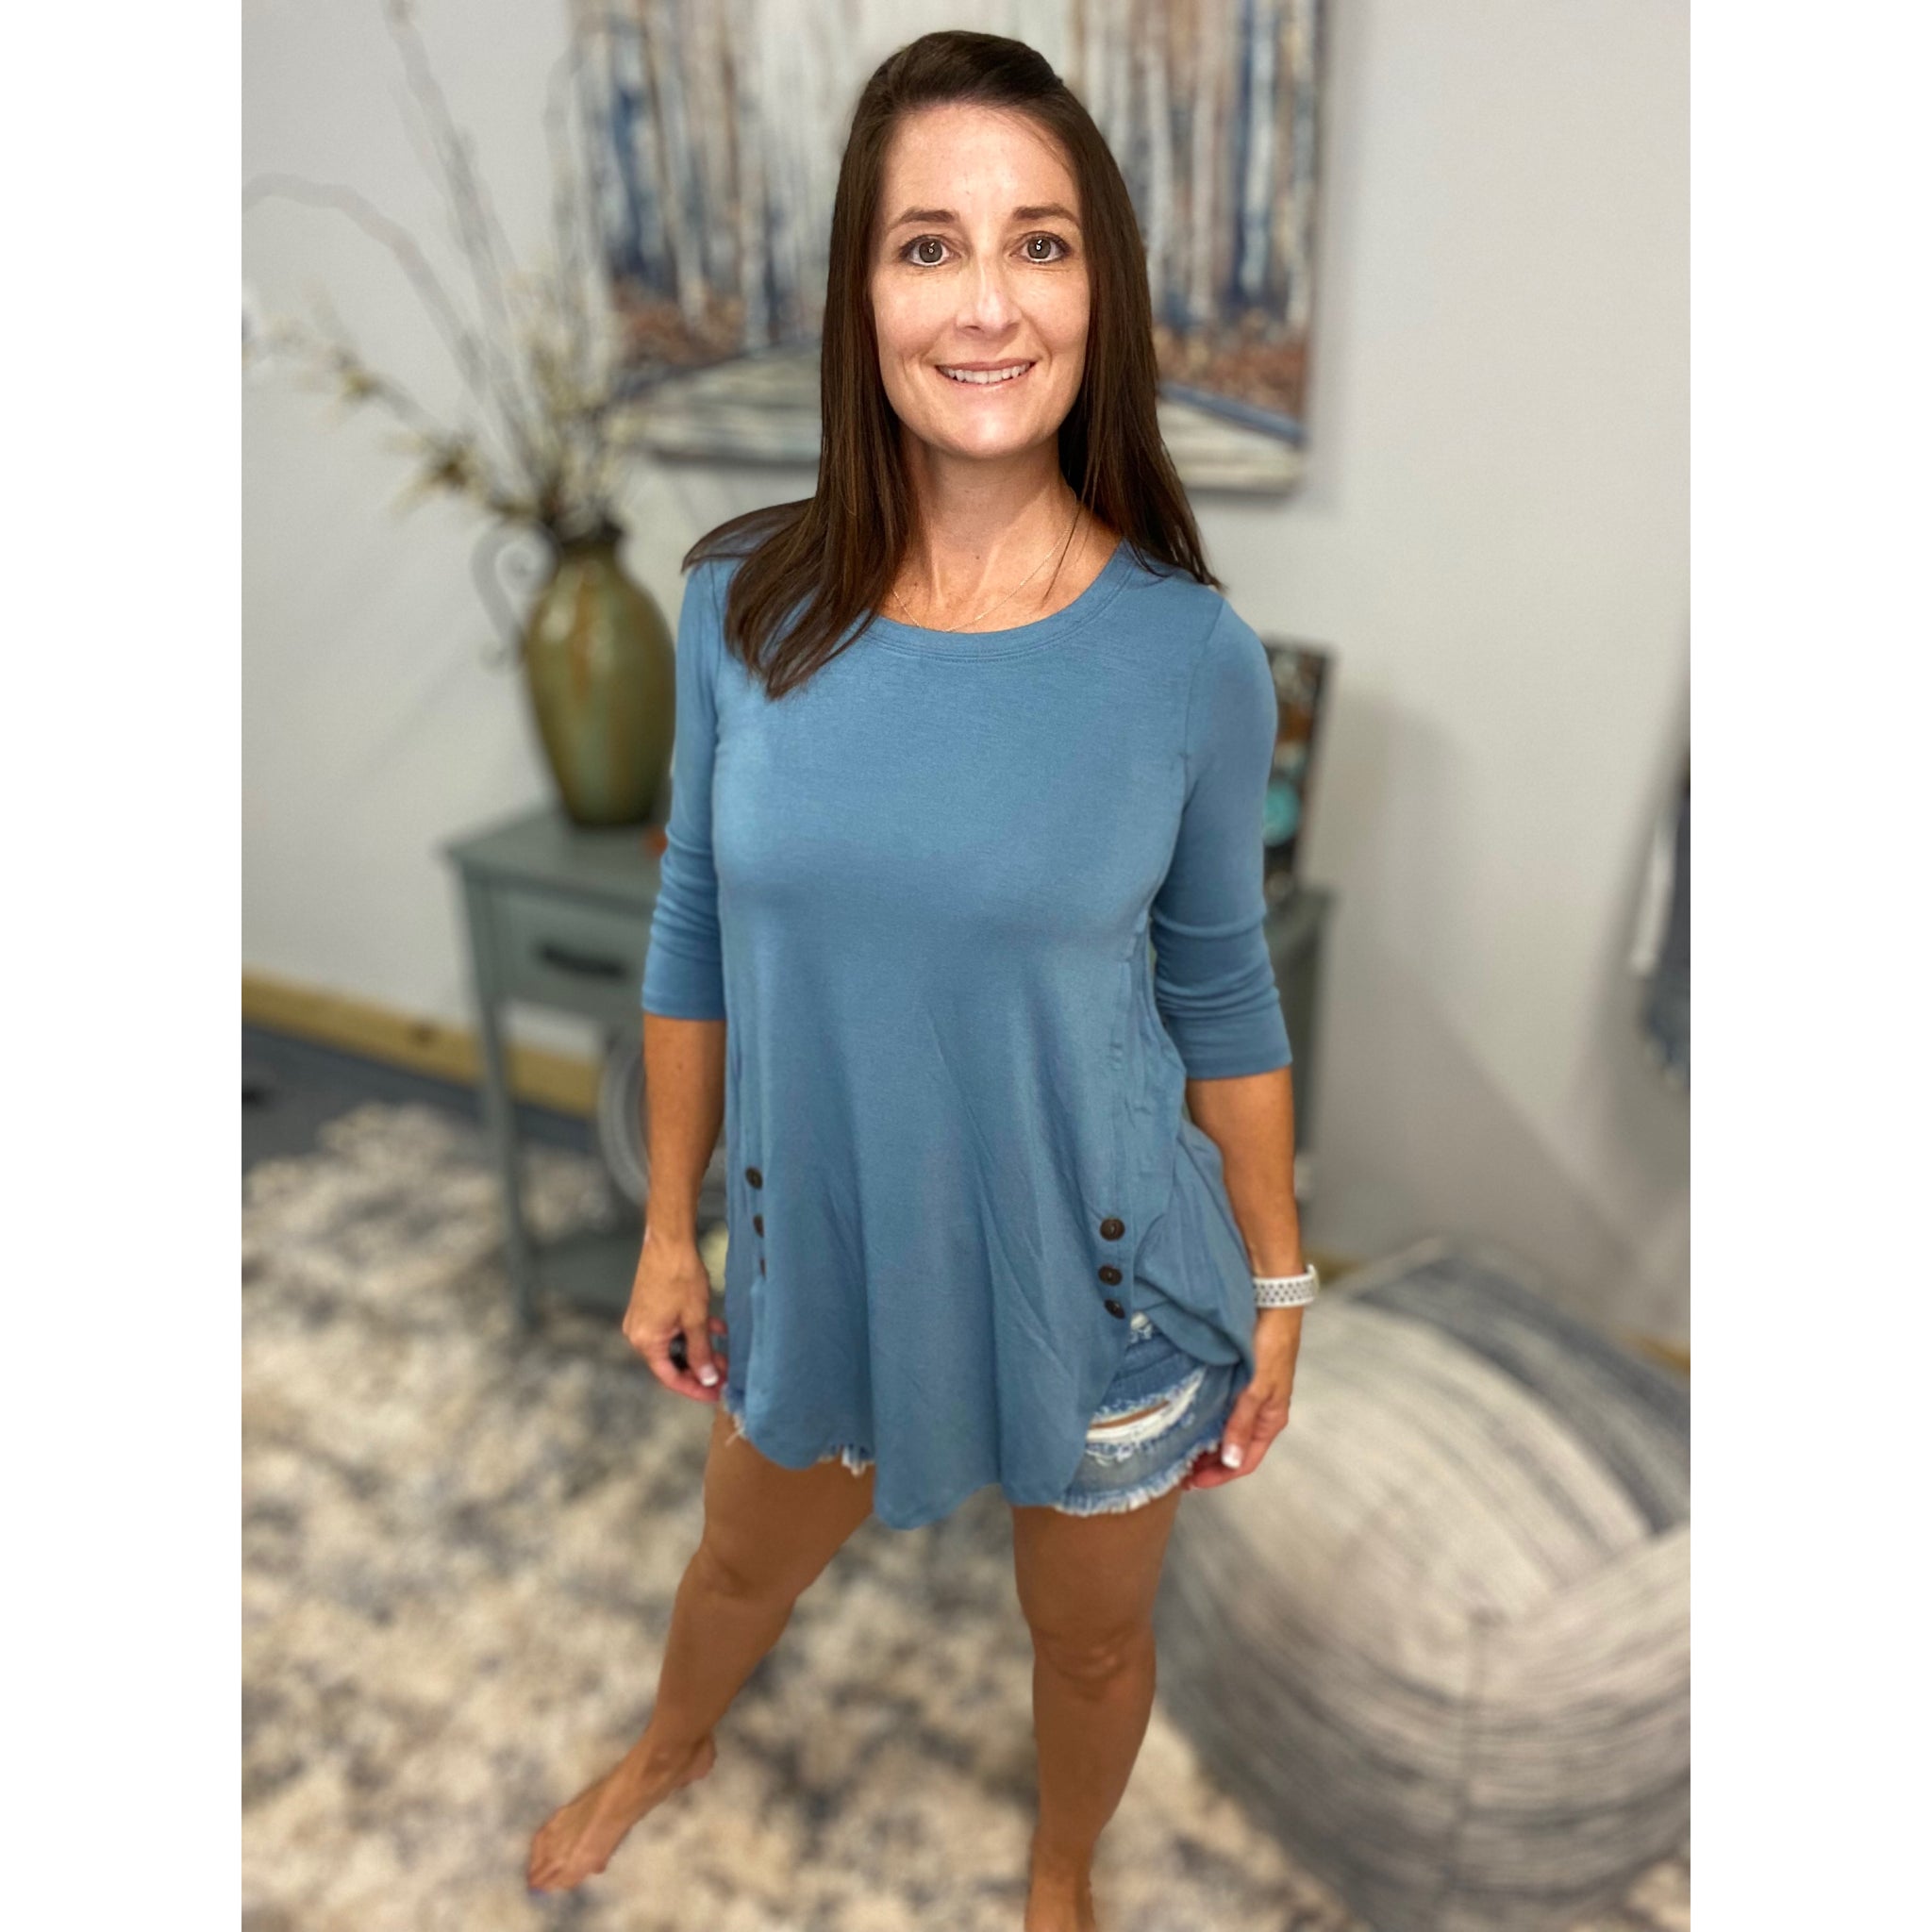 Round Neck Floaty Tunic 3/4 Sleeve With Wood Button Detail Blue S/M/L/XL